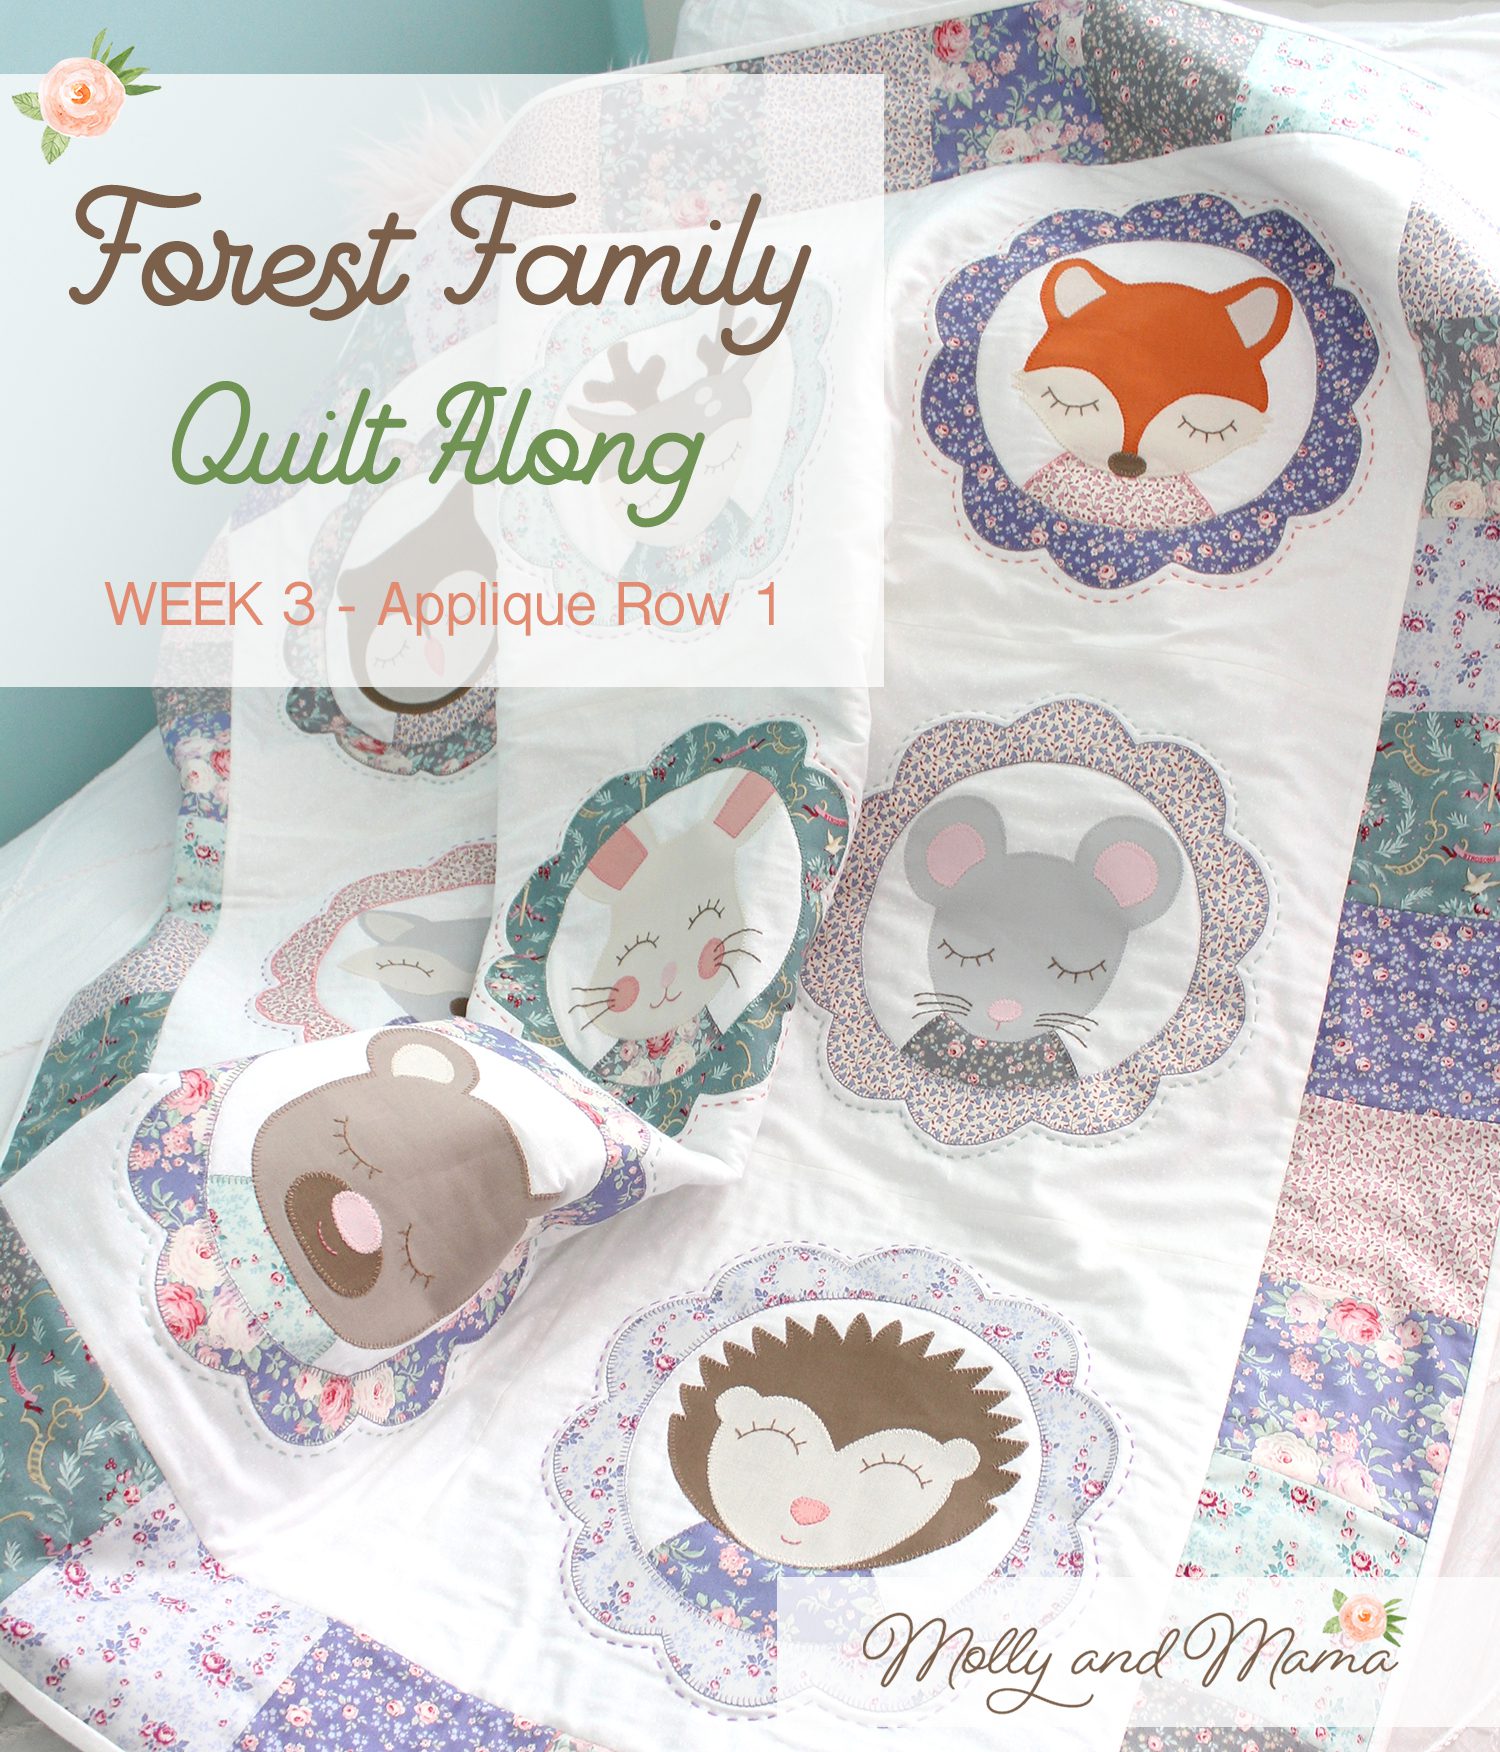 Week 3 – Forest Family Quilt Along